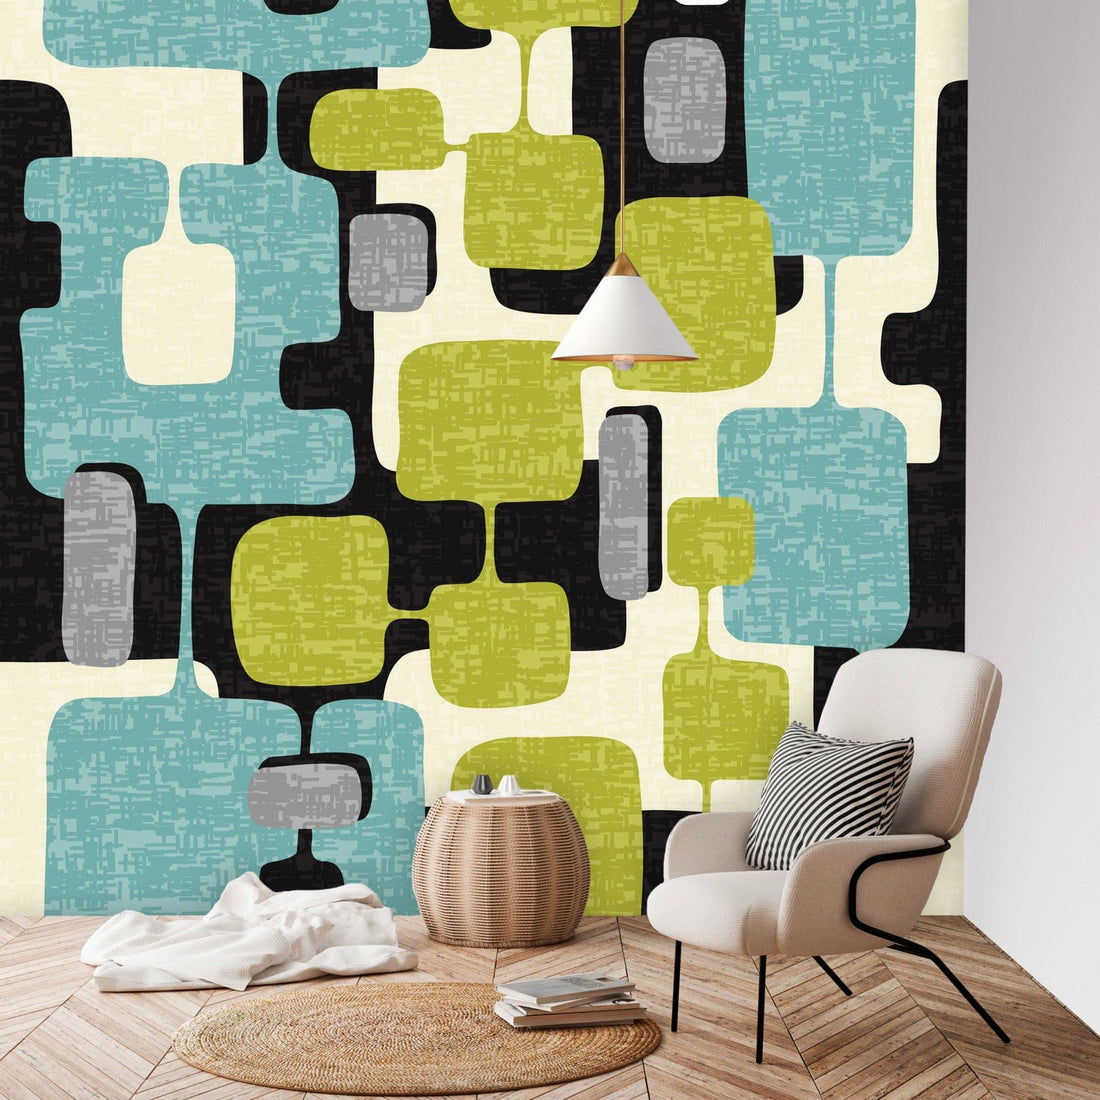 Kate McEnroe New York Wall Mural - Mid Century Modern Abstract, Retro Teal, Lime Green, Gray, Black MCM Wallpaper, Vintage Style Geometric Wall CoveringWall Mural80727